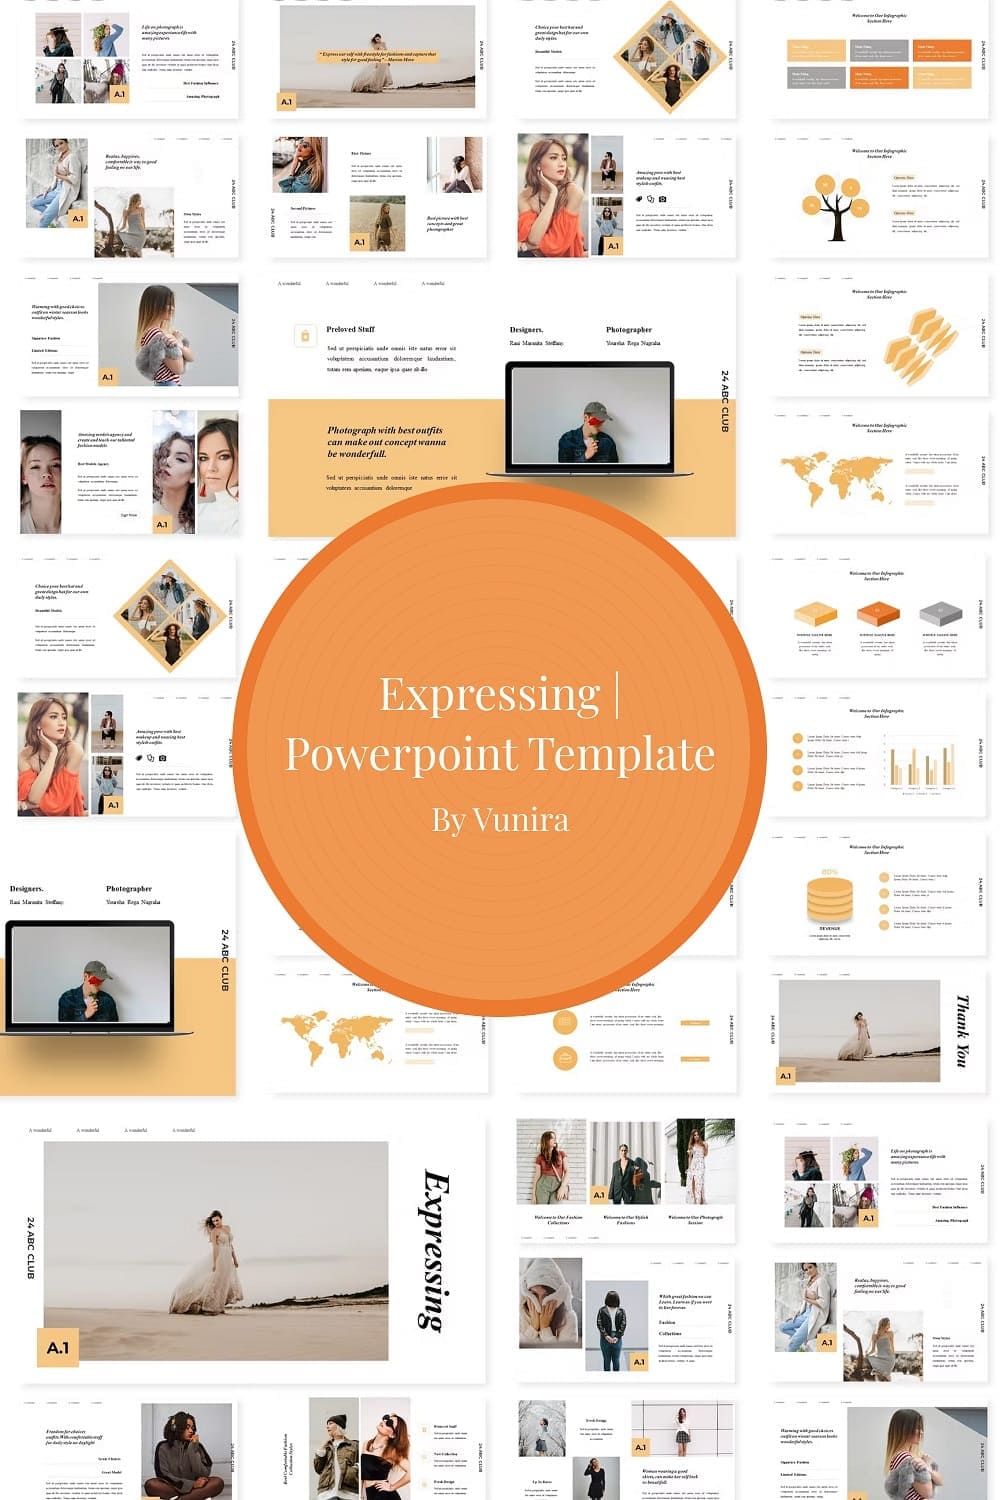 Expressing | is displayed on the laptop Powerpoint Template.